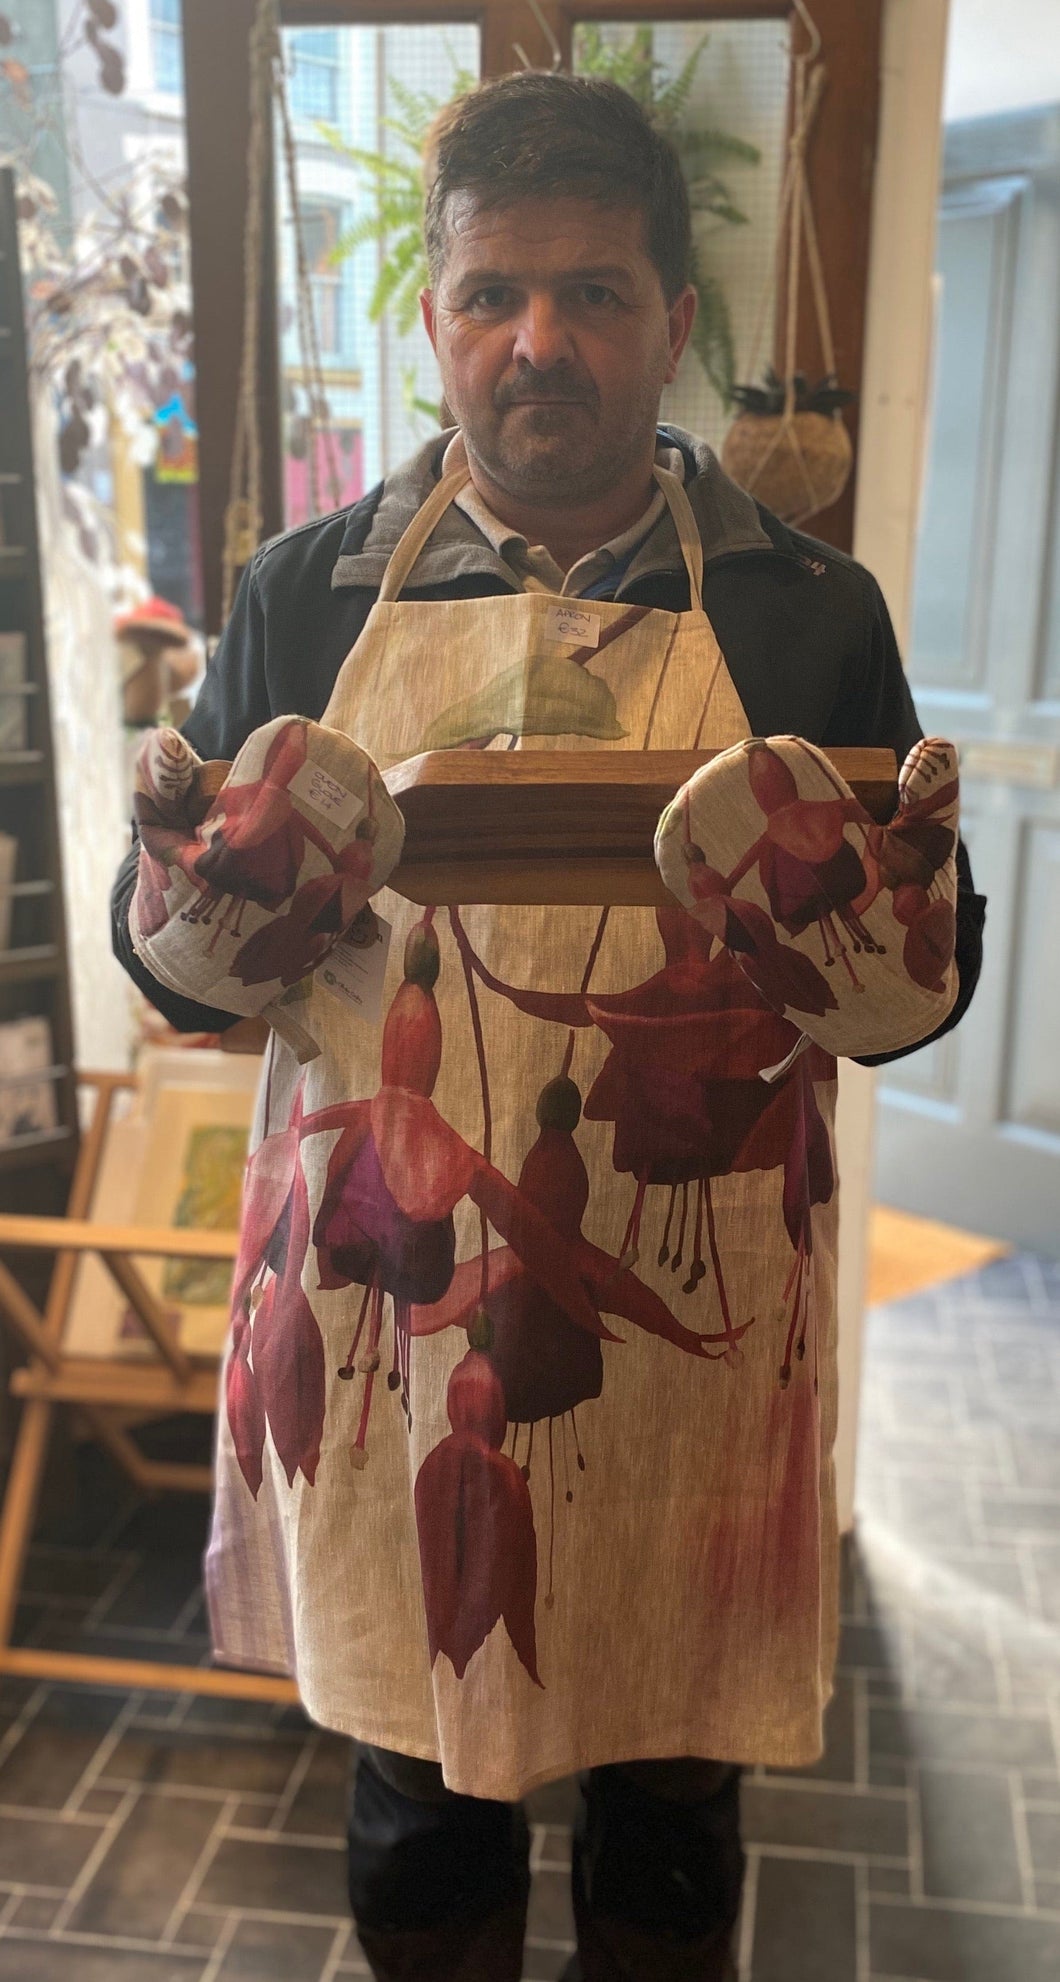 Fuchsia (Style 2) Hand Painted Apron and Oven Gloves - Strelitzia's Floristry & Irish Craft Shop